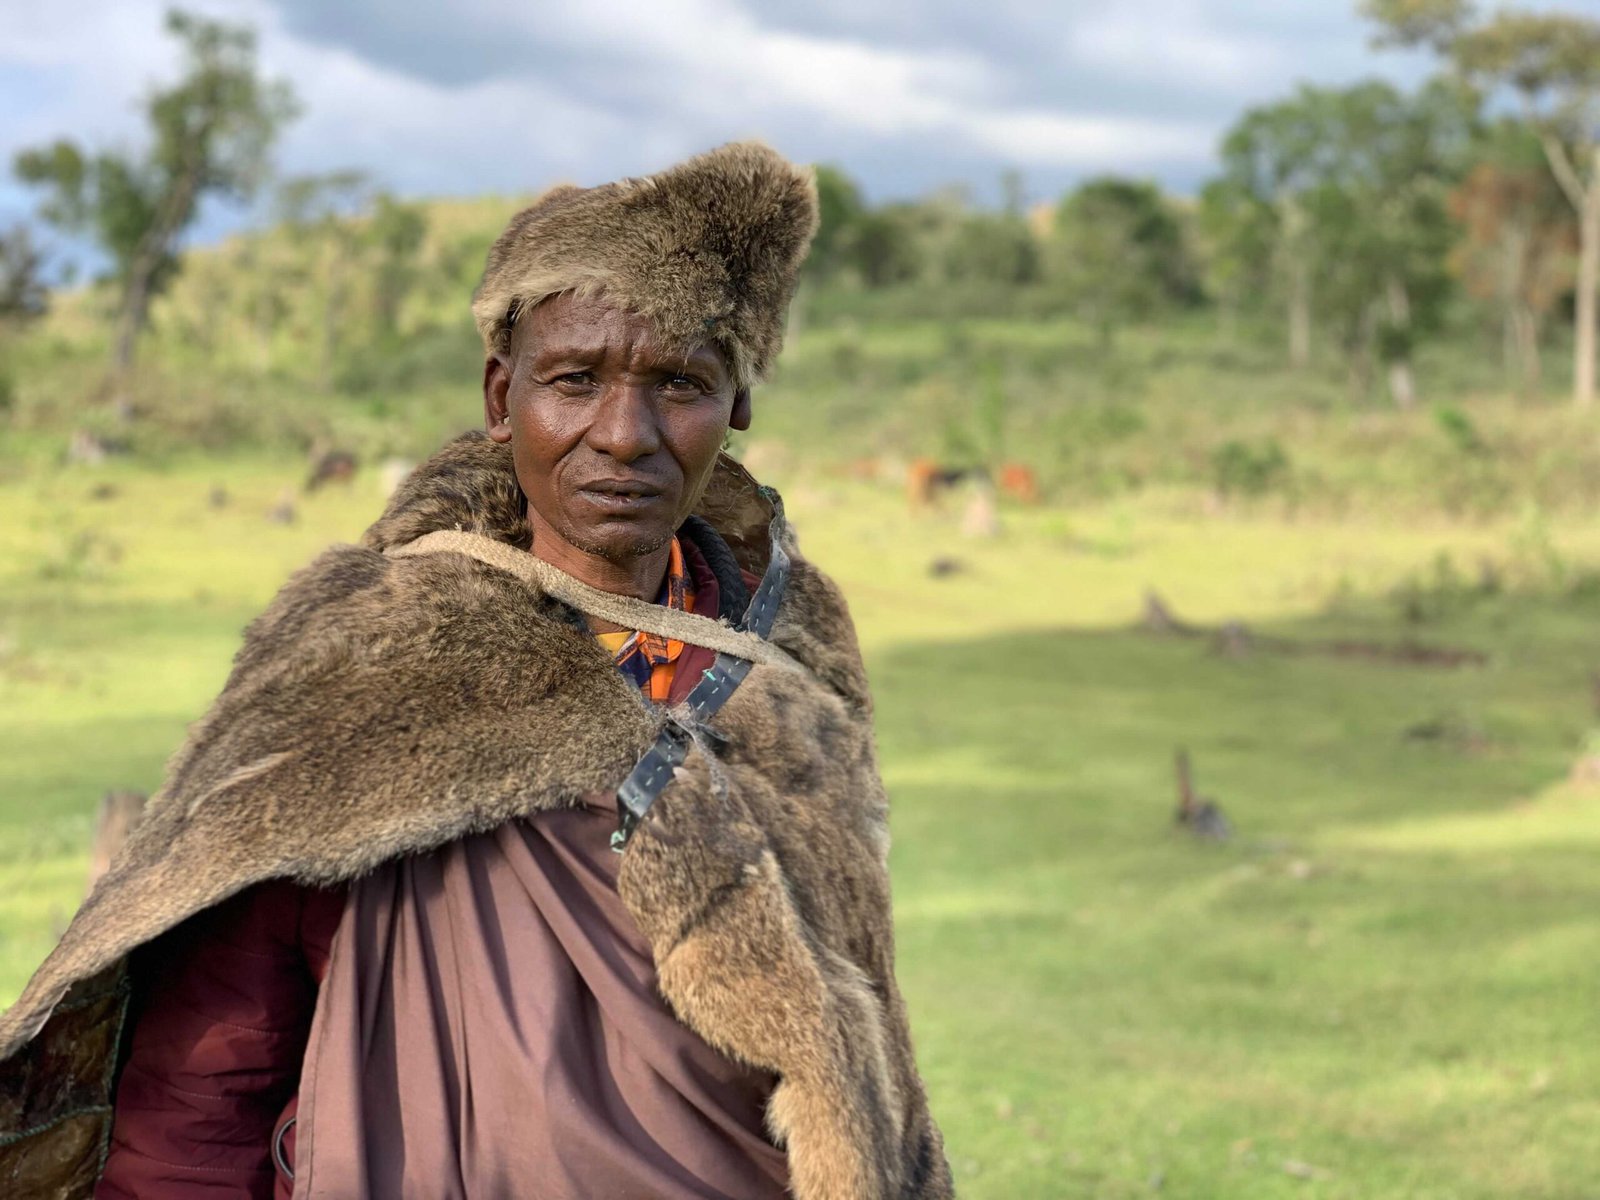 Samuel Salaton, a member of the Ogiek community, stands on land right next to Mau Forest. He is dressed in furs.